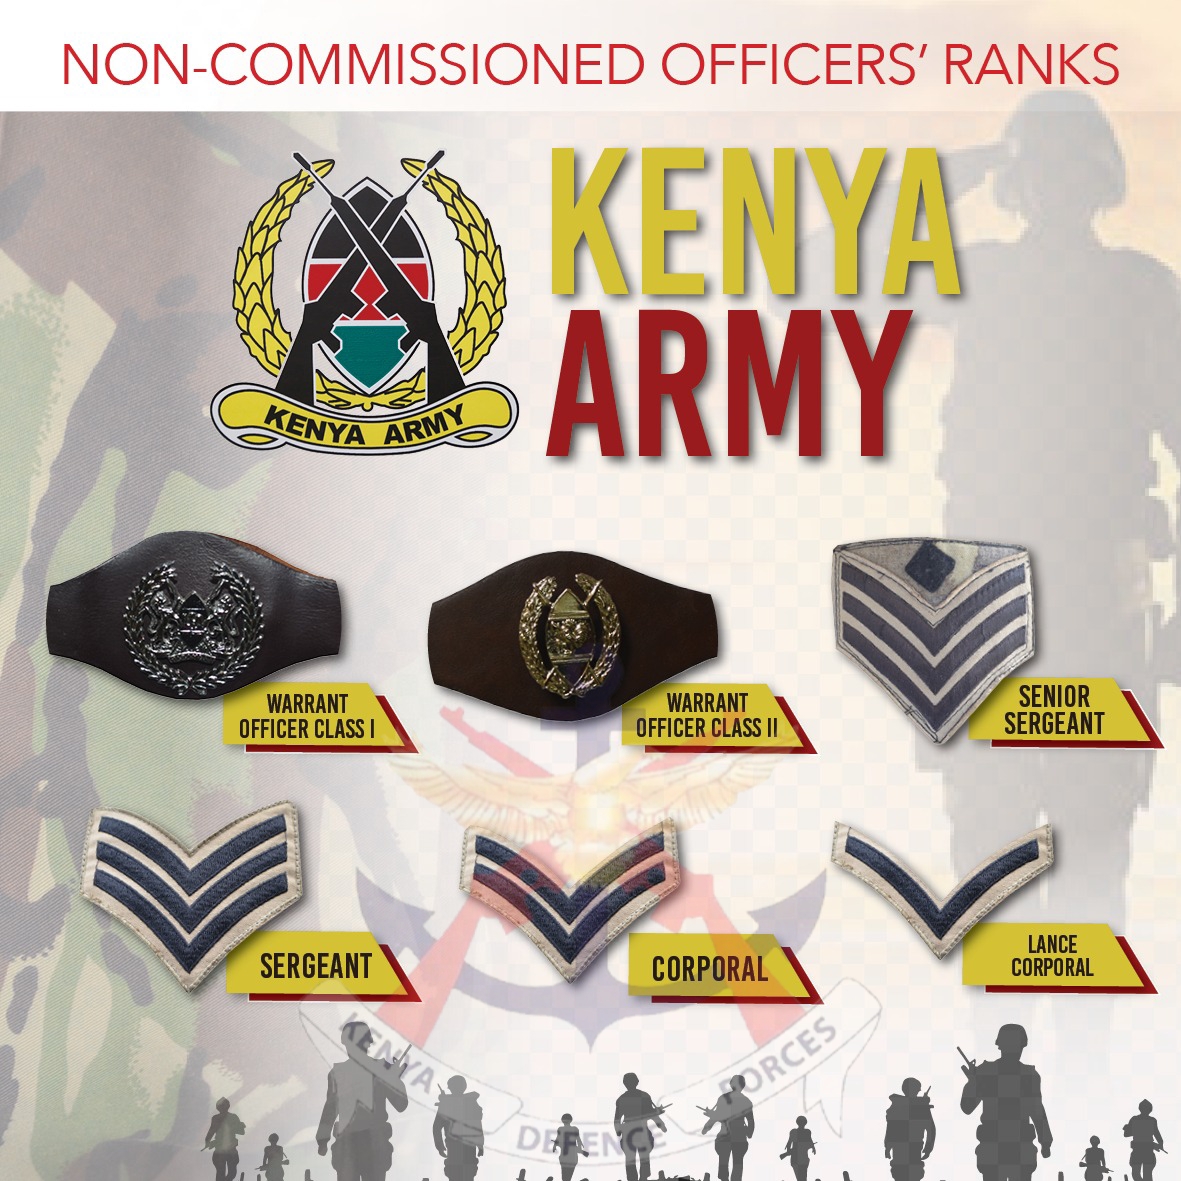 how much does a kdf officer earn in kenya?